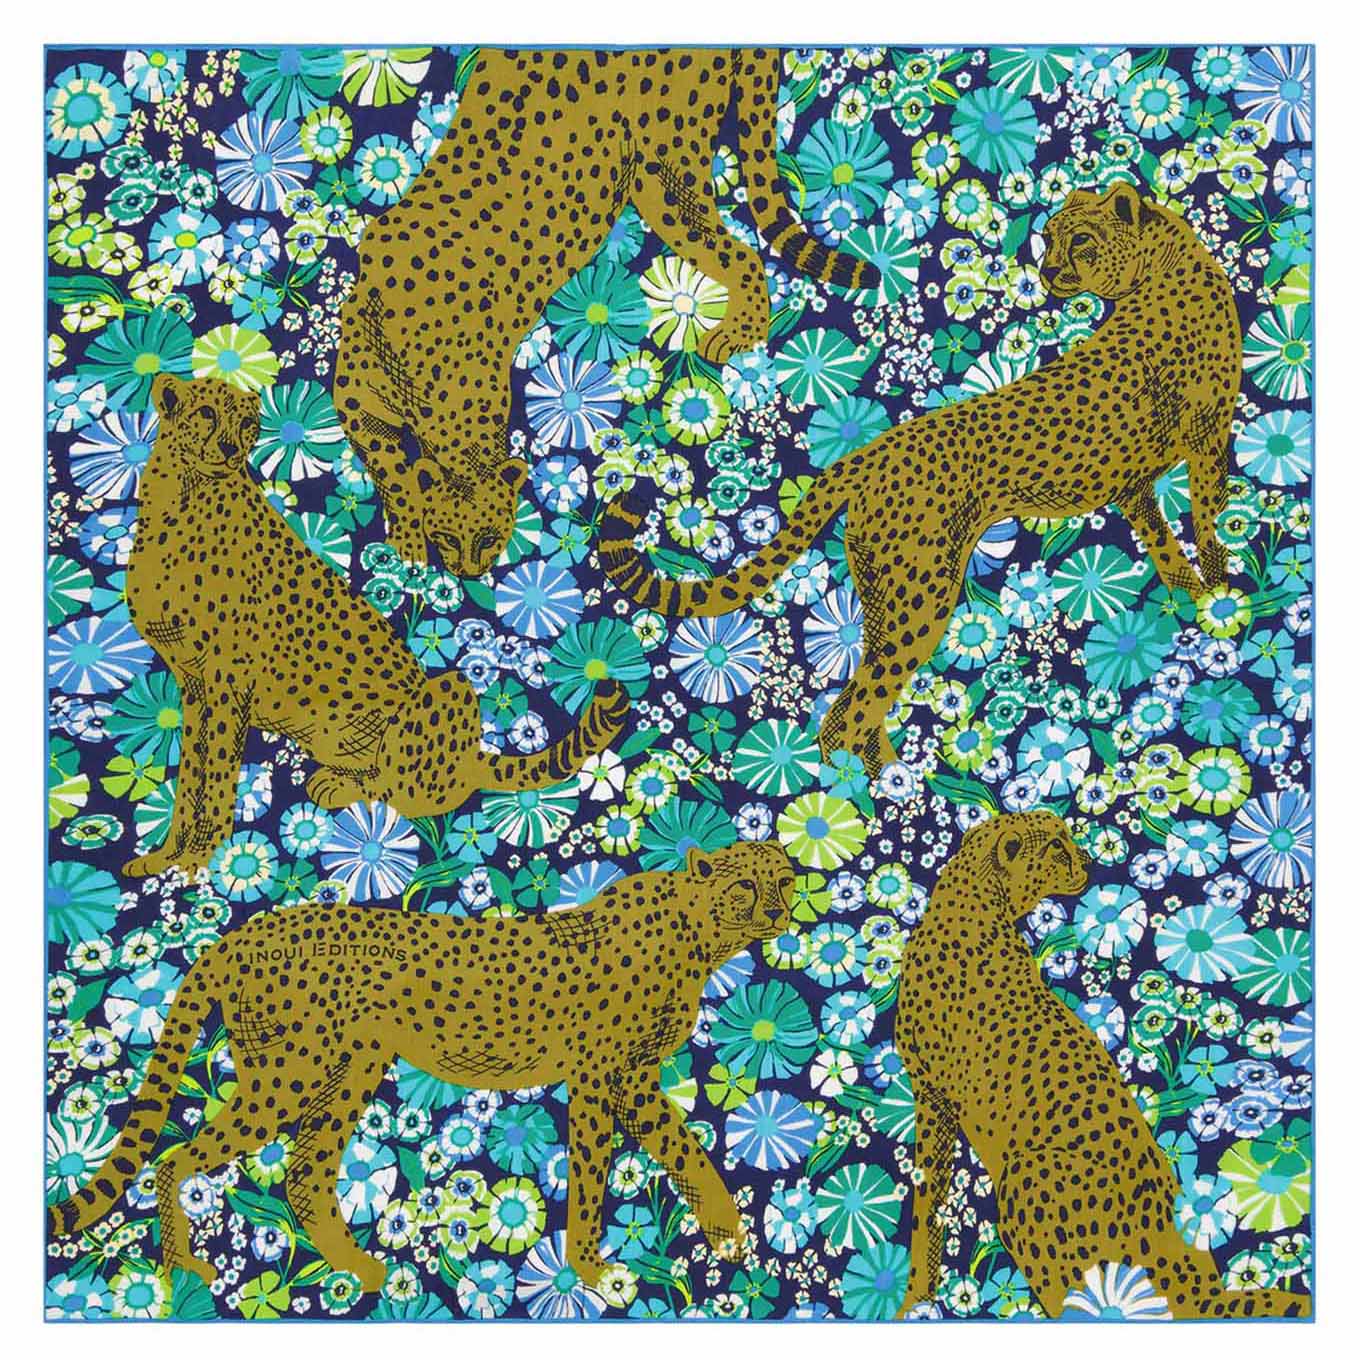 Inoui Editions Pampa daisy turquoise scarf carre silk cotton cheetahs in field of flowers.